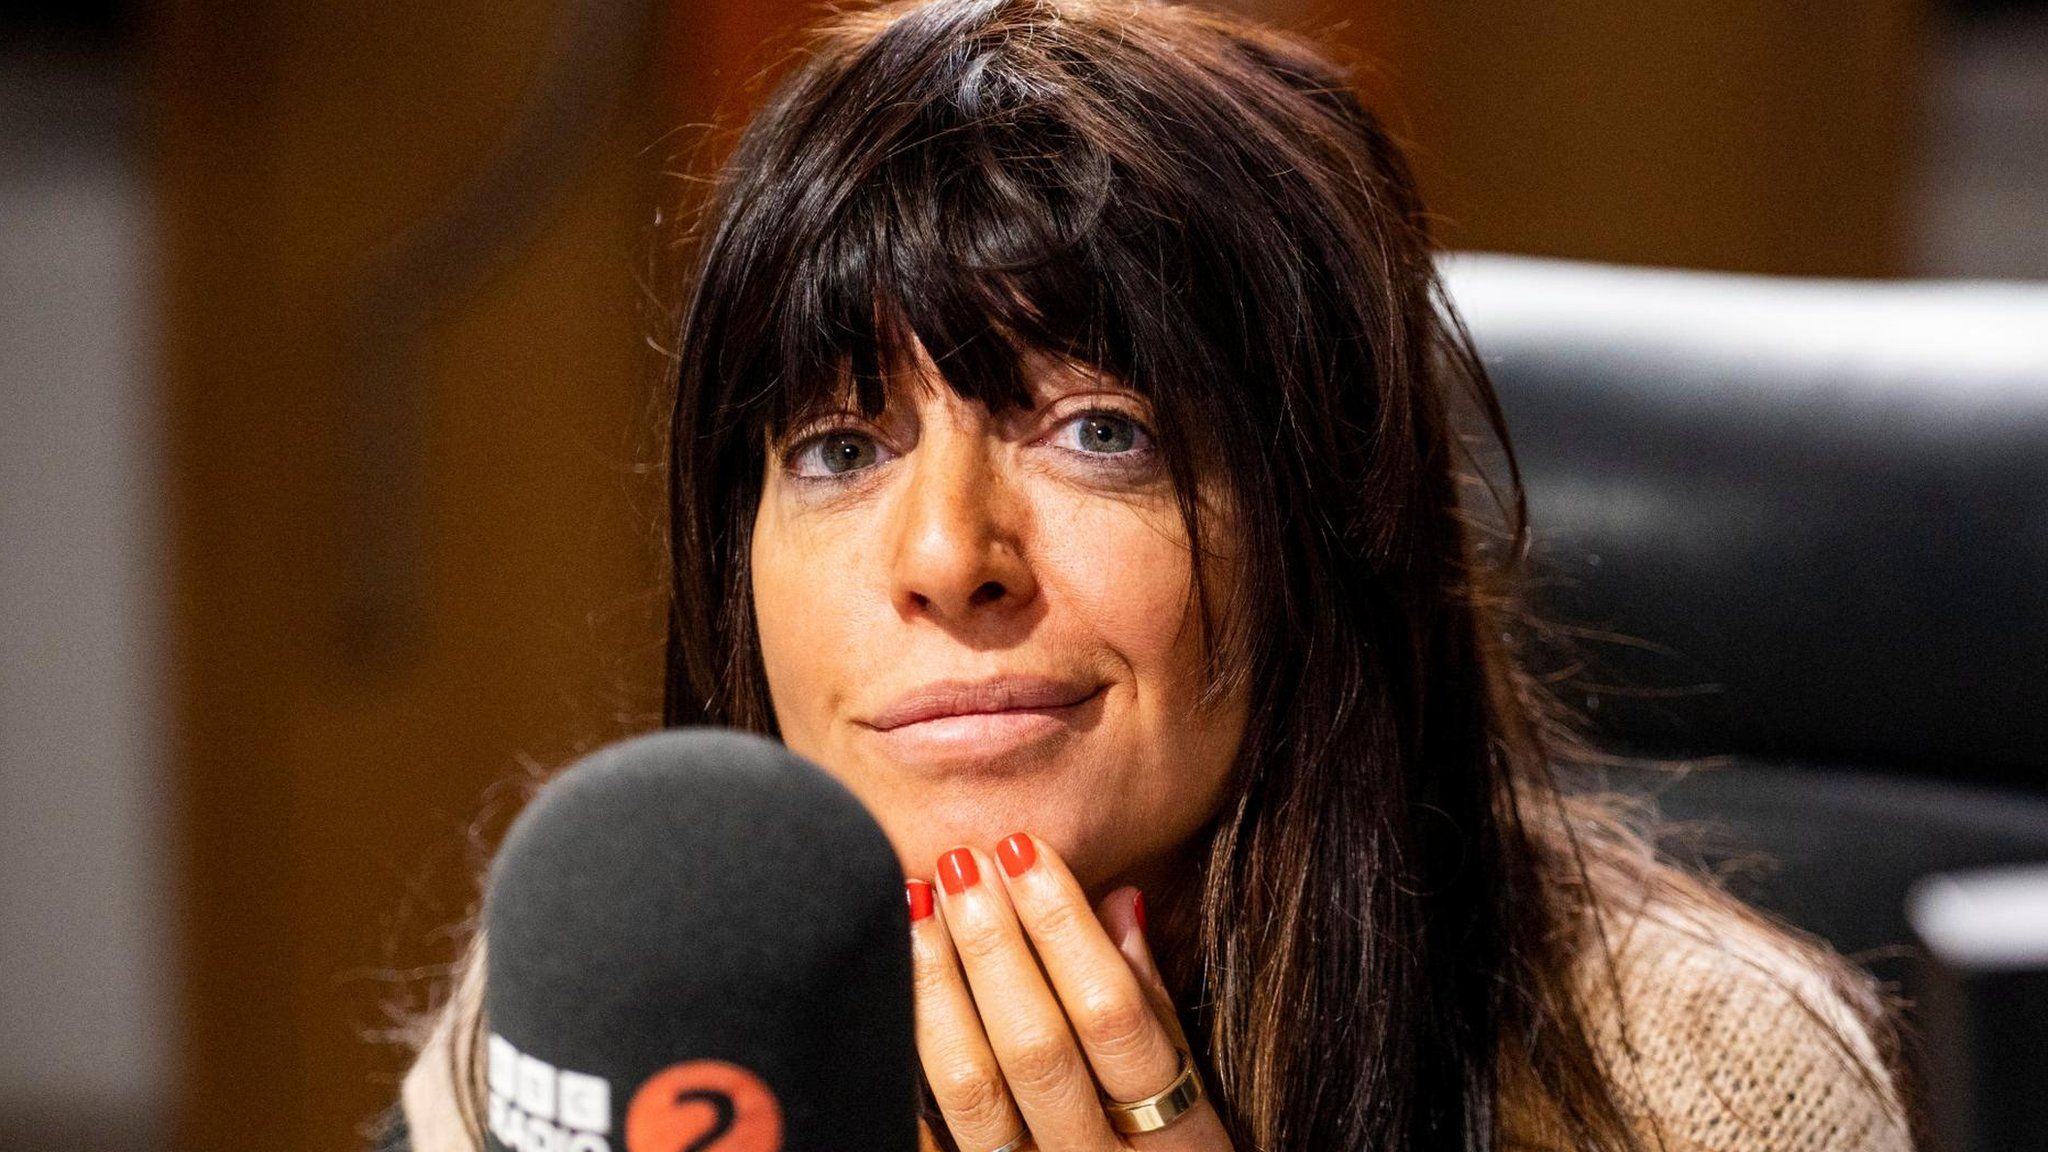 Claudia Winkleman photographed for BBC Radio 2 at Wogan House on Saturday 3rd September 2022